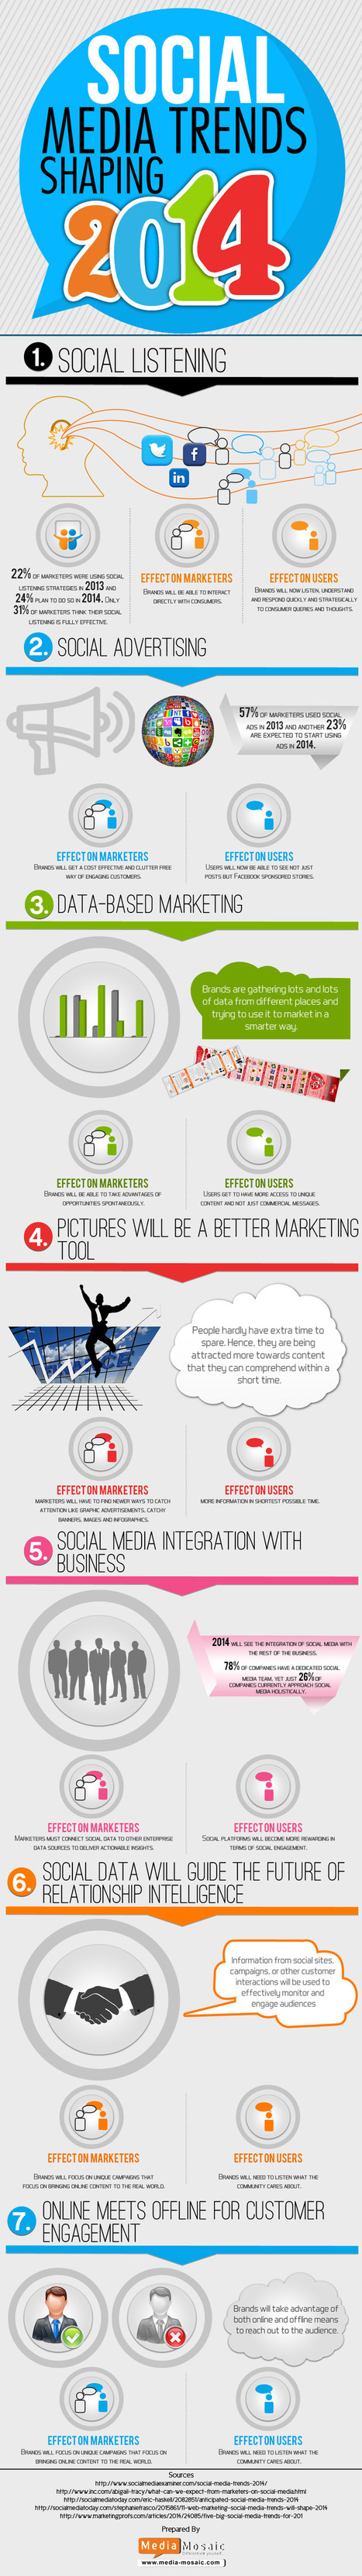 7 Trends Shaping How Brands Use Social Media in 2014 [INFOGRAPHIC] | Marketing Tips | Scoop.it